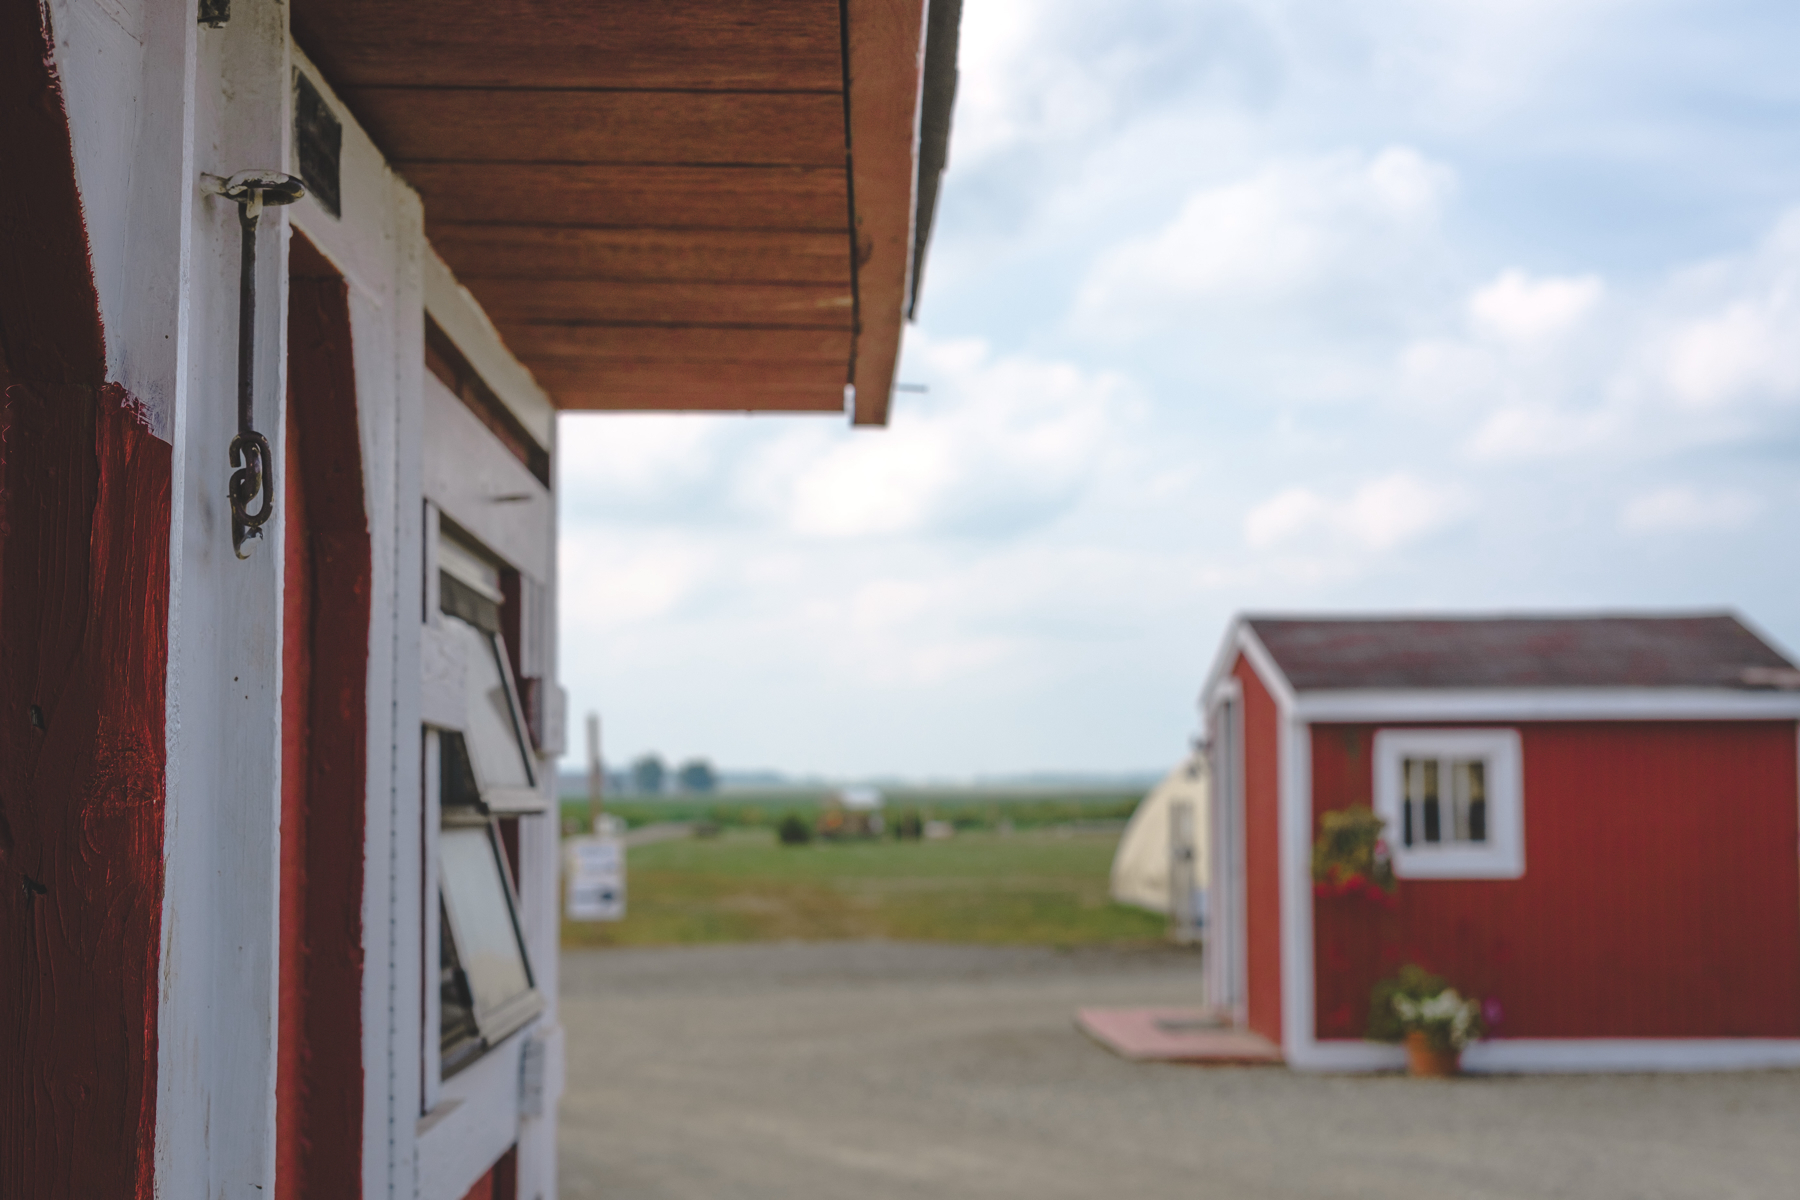 A close-up of the corner of a small barn with part of a red door visible, featuring a metal latch. In the blurred background, there is a red shed and an open landscape